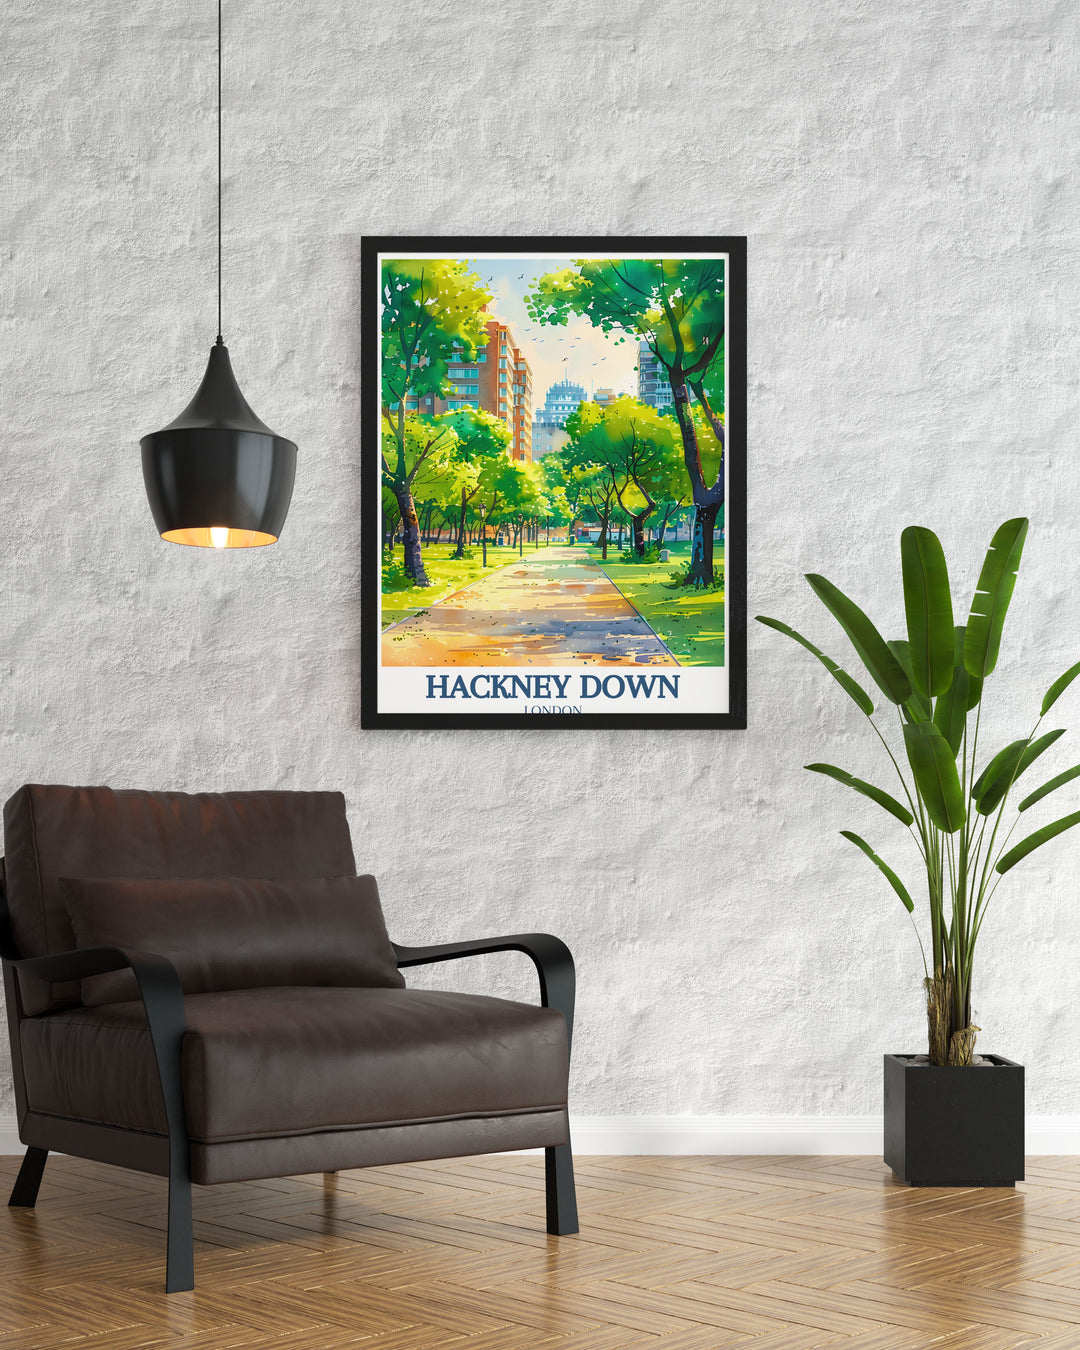 This travel poster of Hackney Downs Park captures the lush green spaces and tranquil atmosphere, perfect for adding a touch of East Londons natural beauty to your home decor.